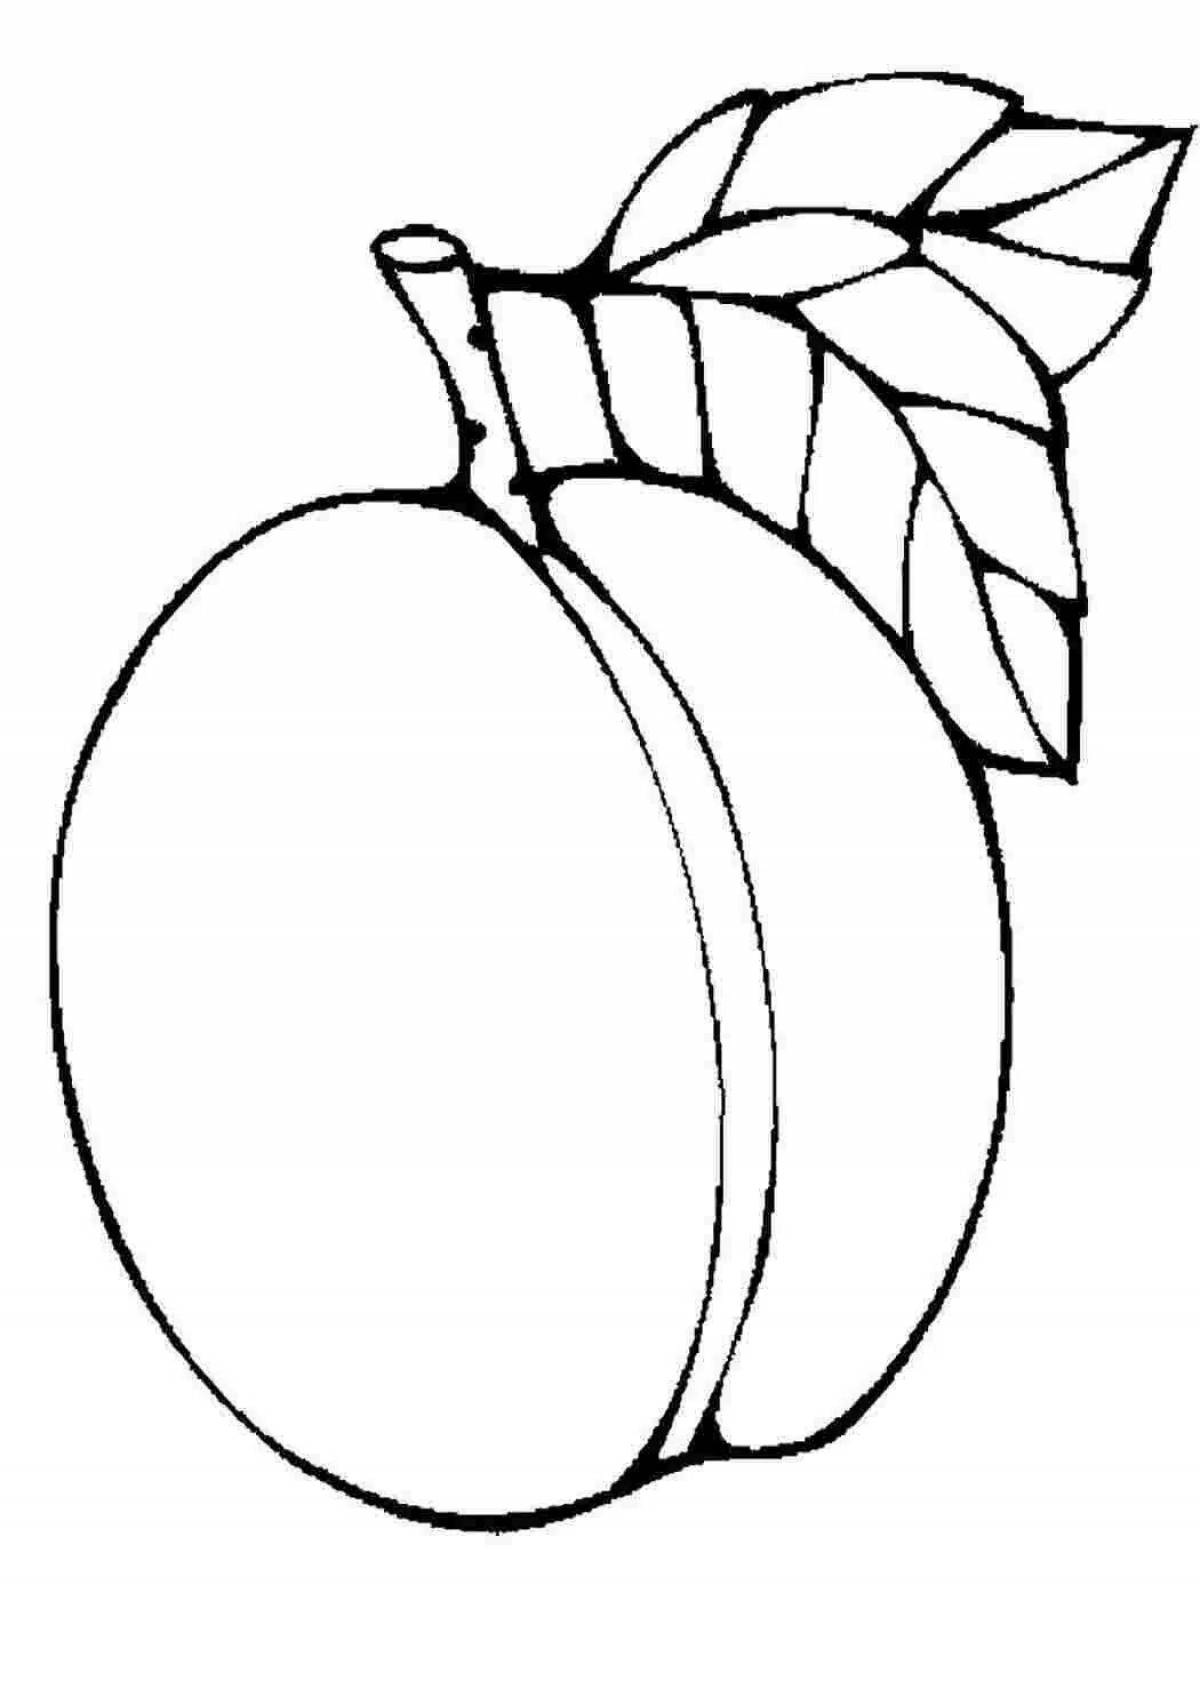 Cute apricot coloring book for kids